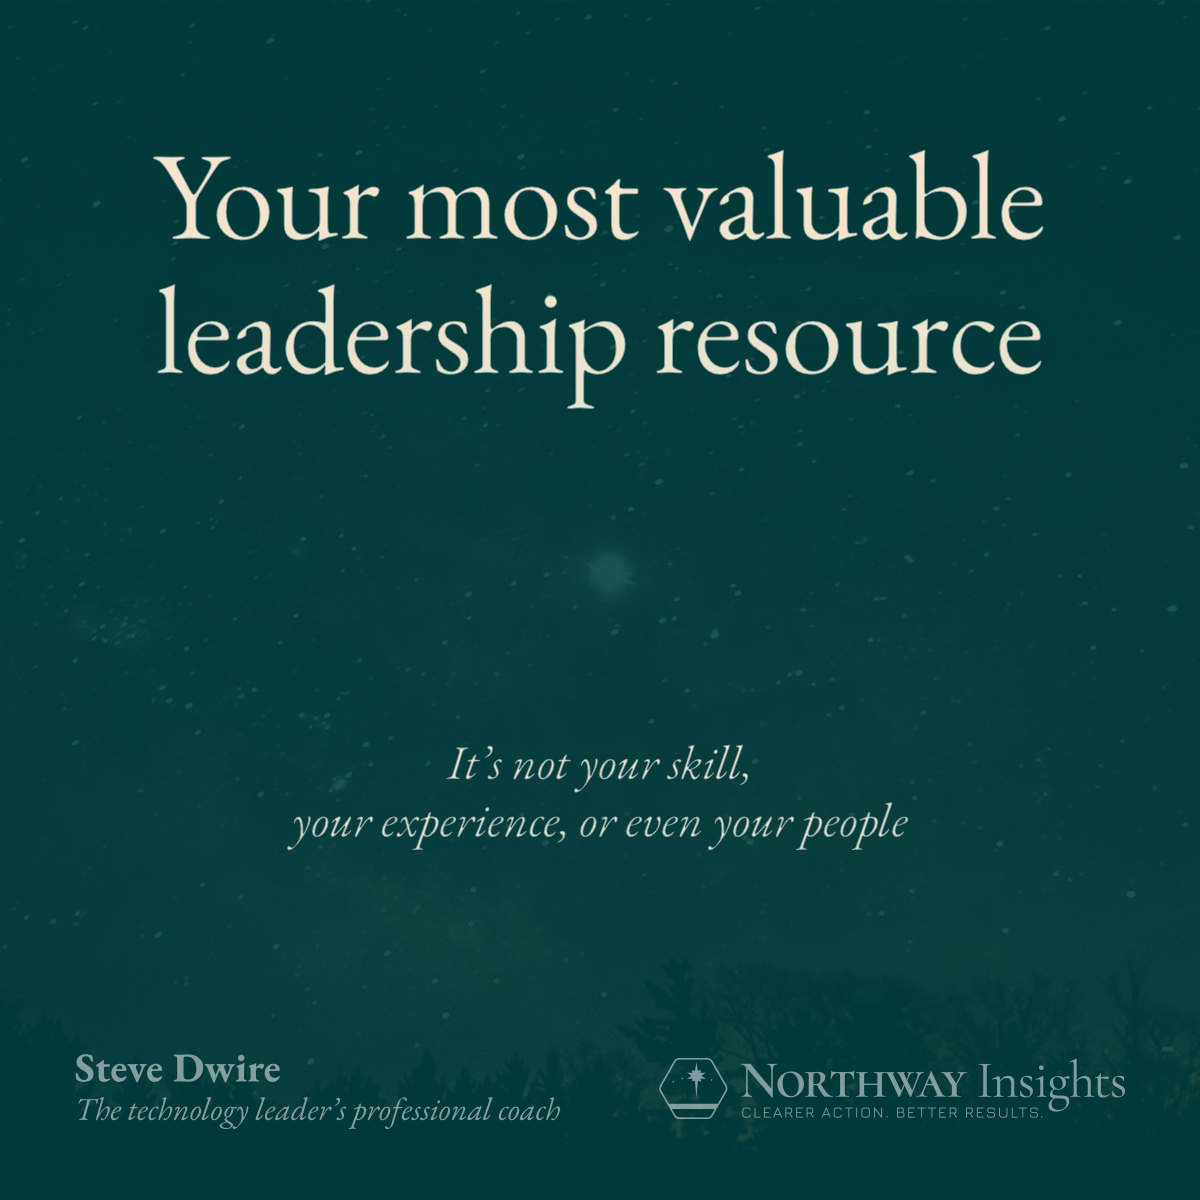 Your most valuable leadership resource (It's not your skill, your experience, or even your people)